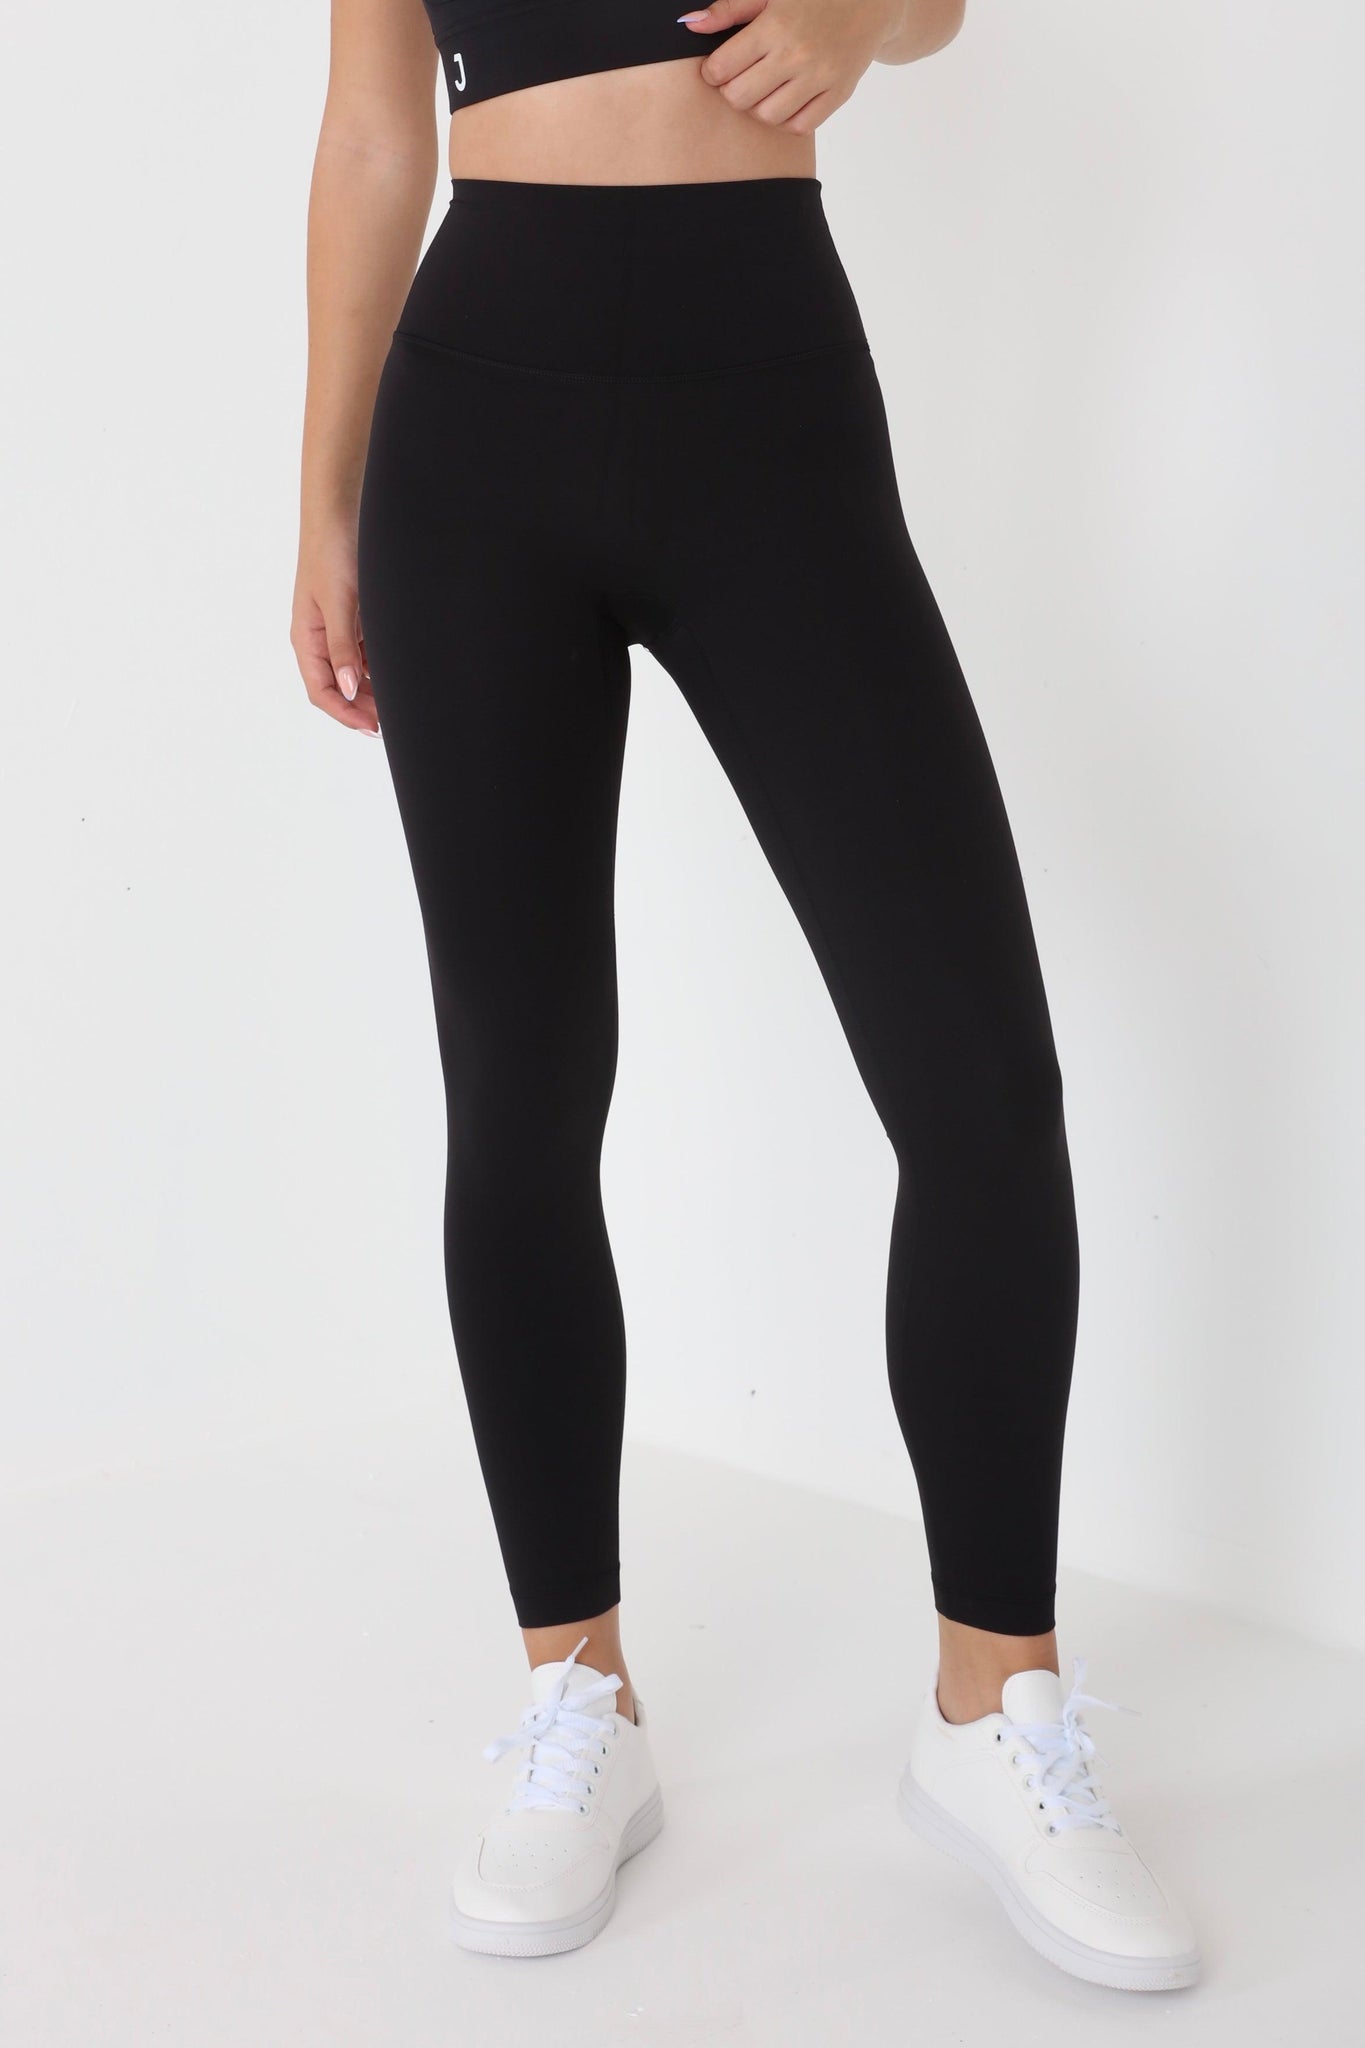 JUV fresh legging in black color, close up front view.